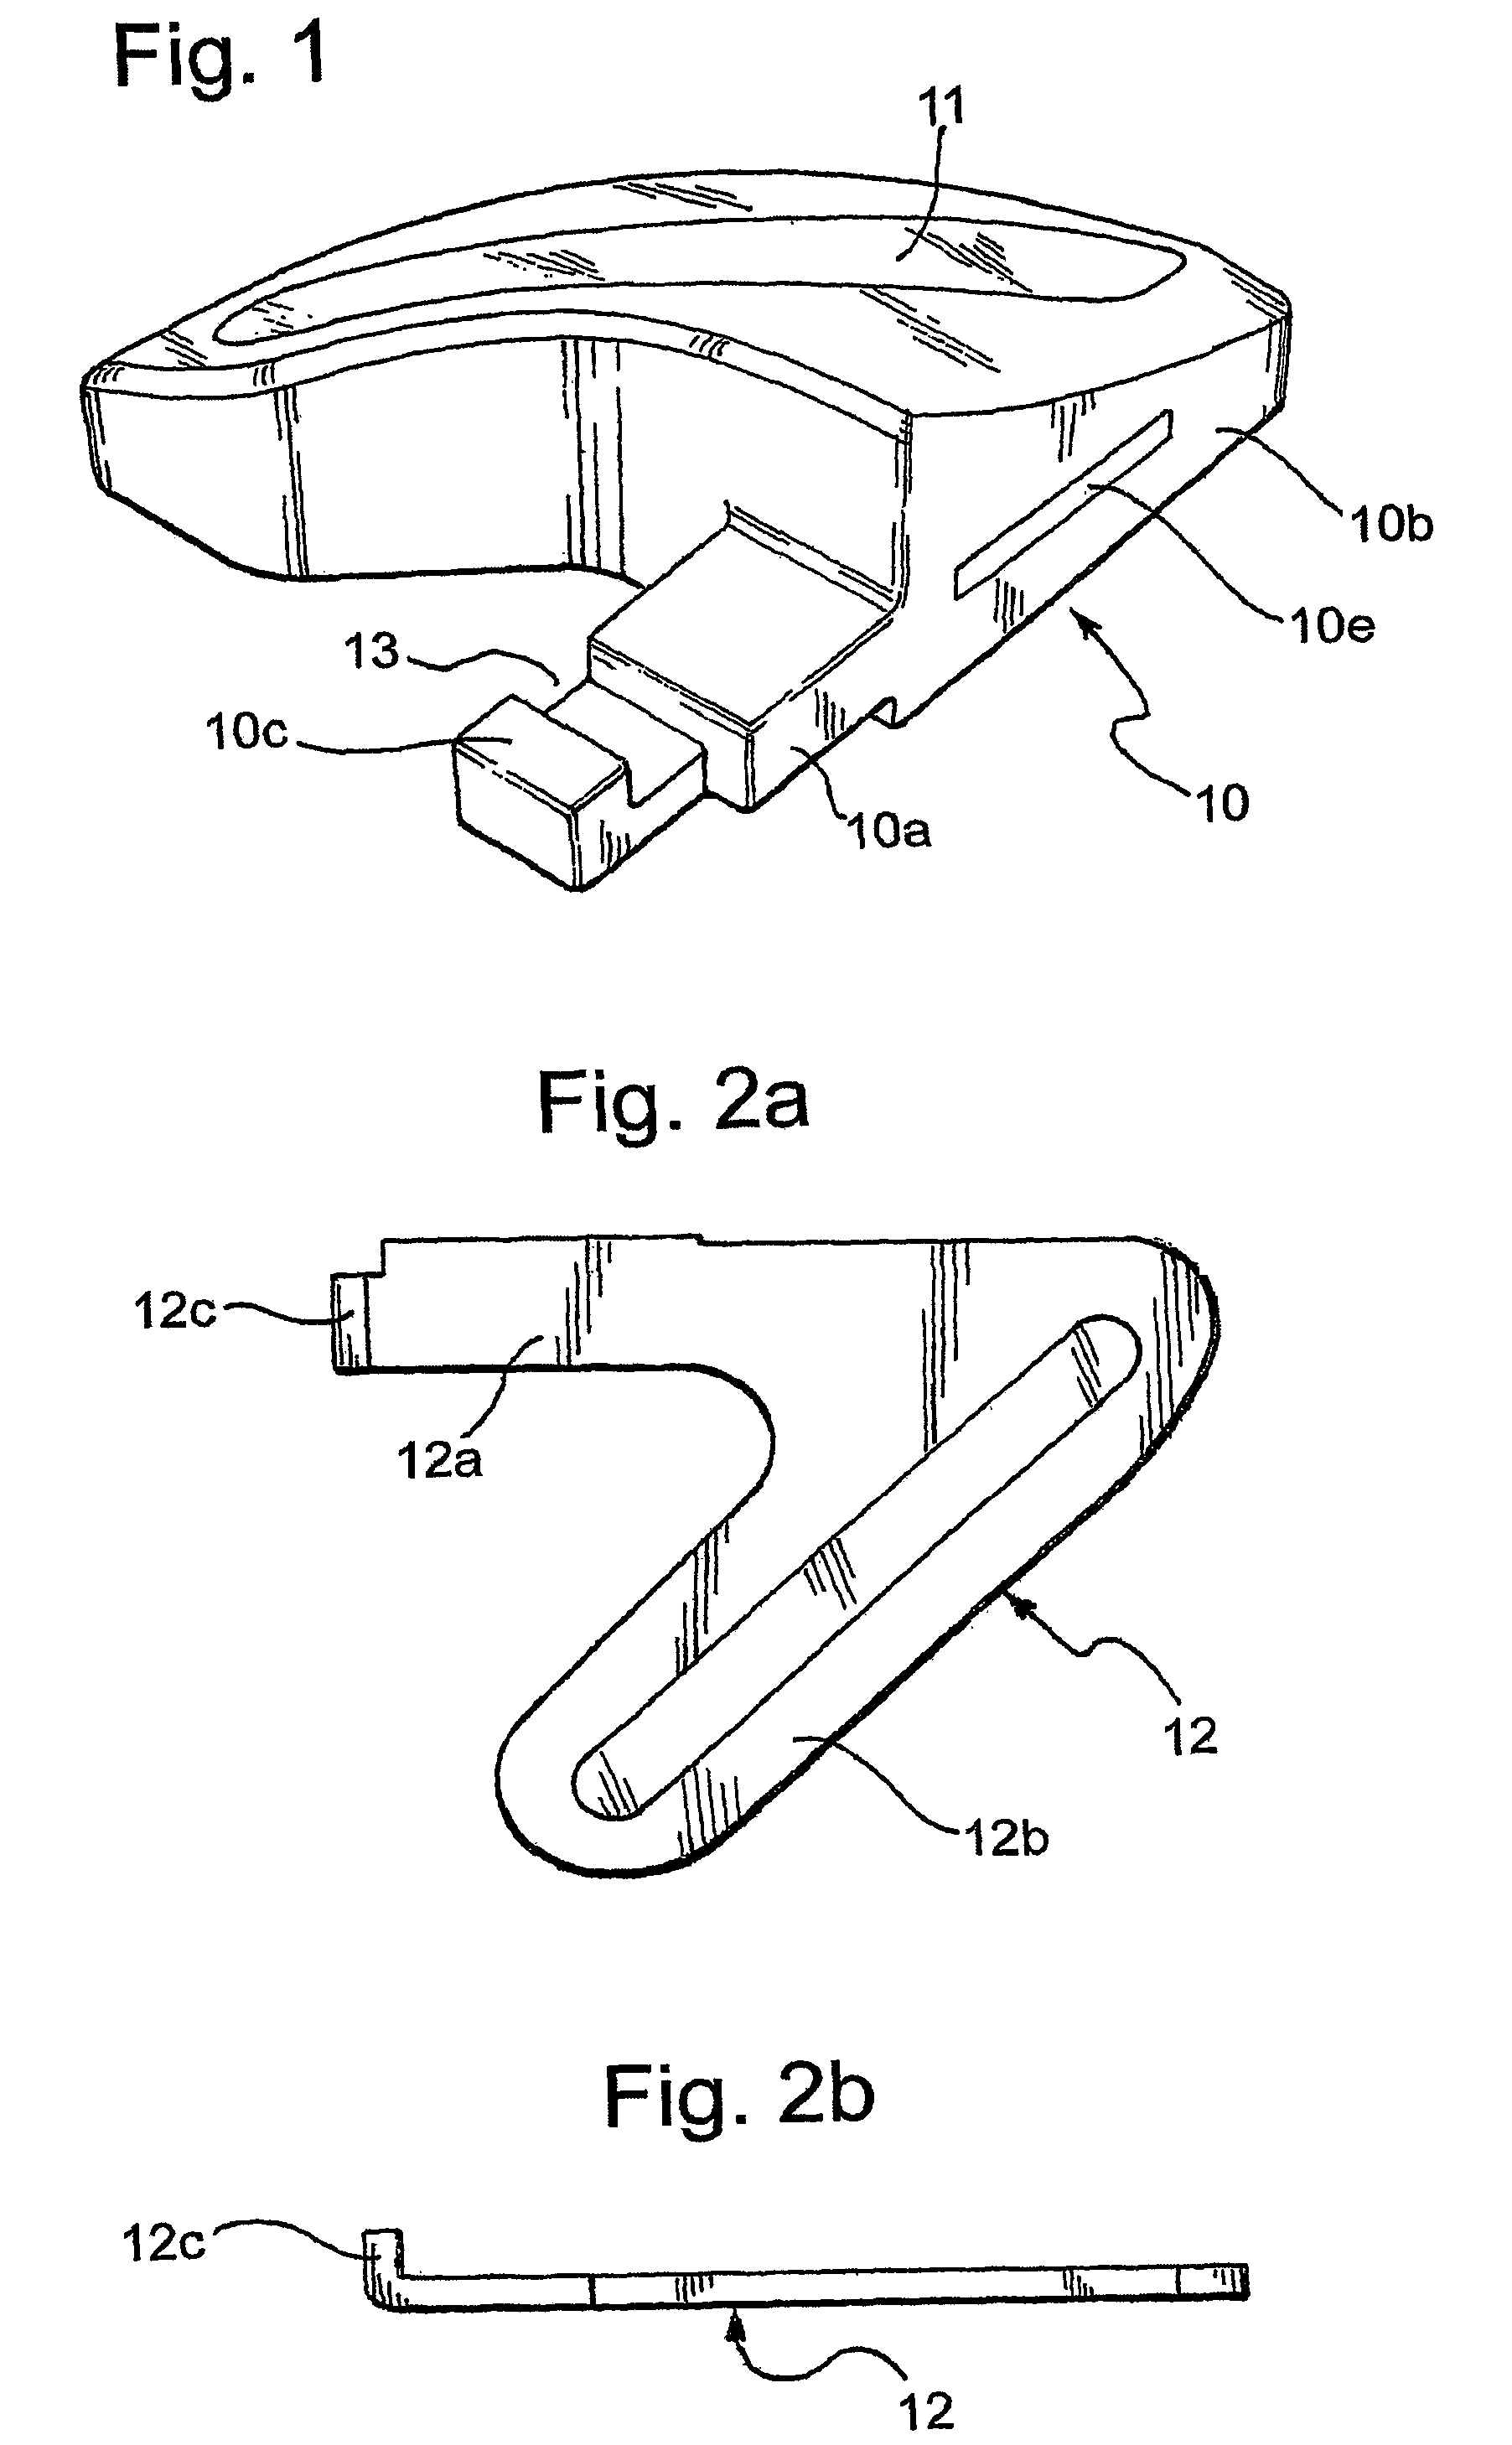 Coupling device for restraining belts, particularly for children's safety seats for motor vehicles